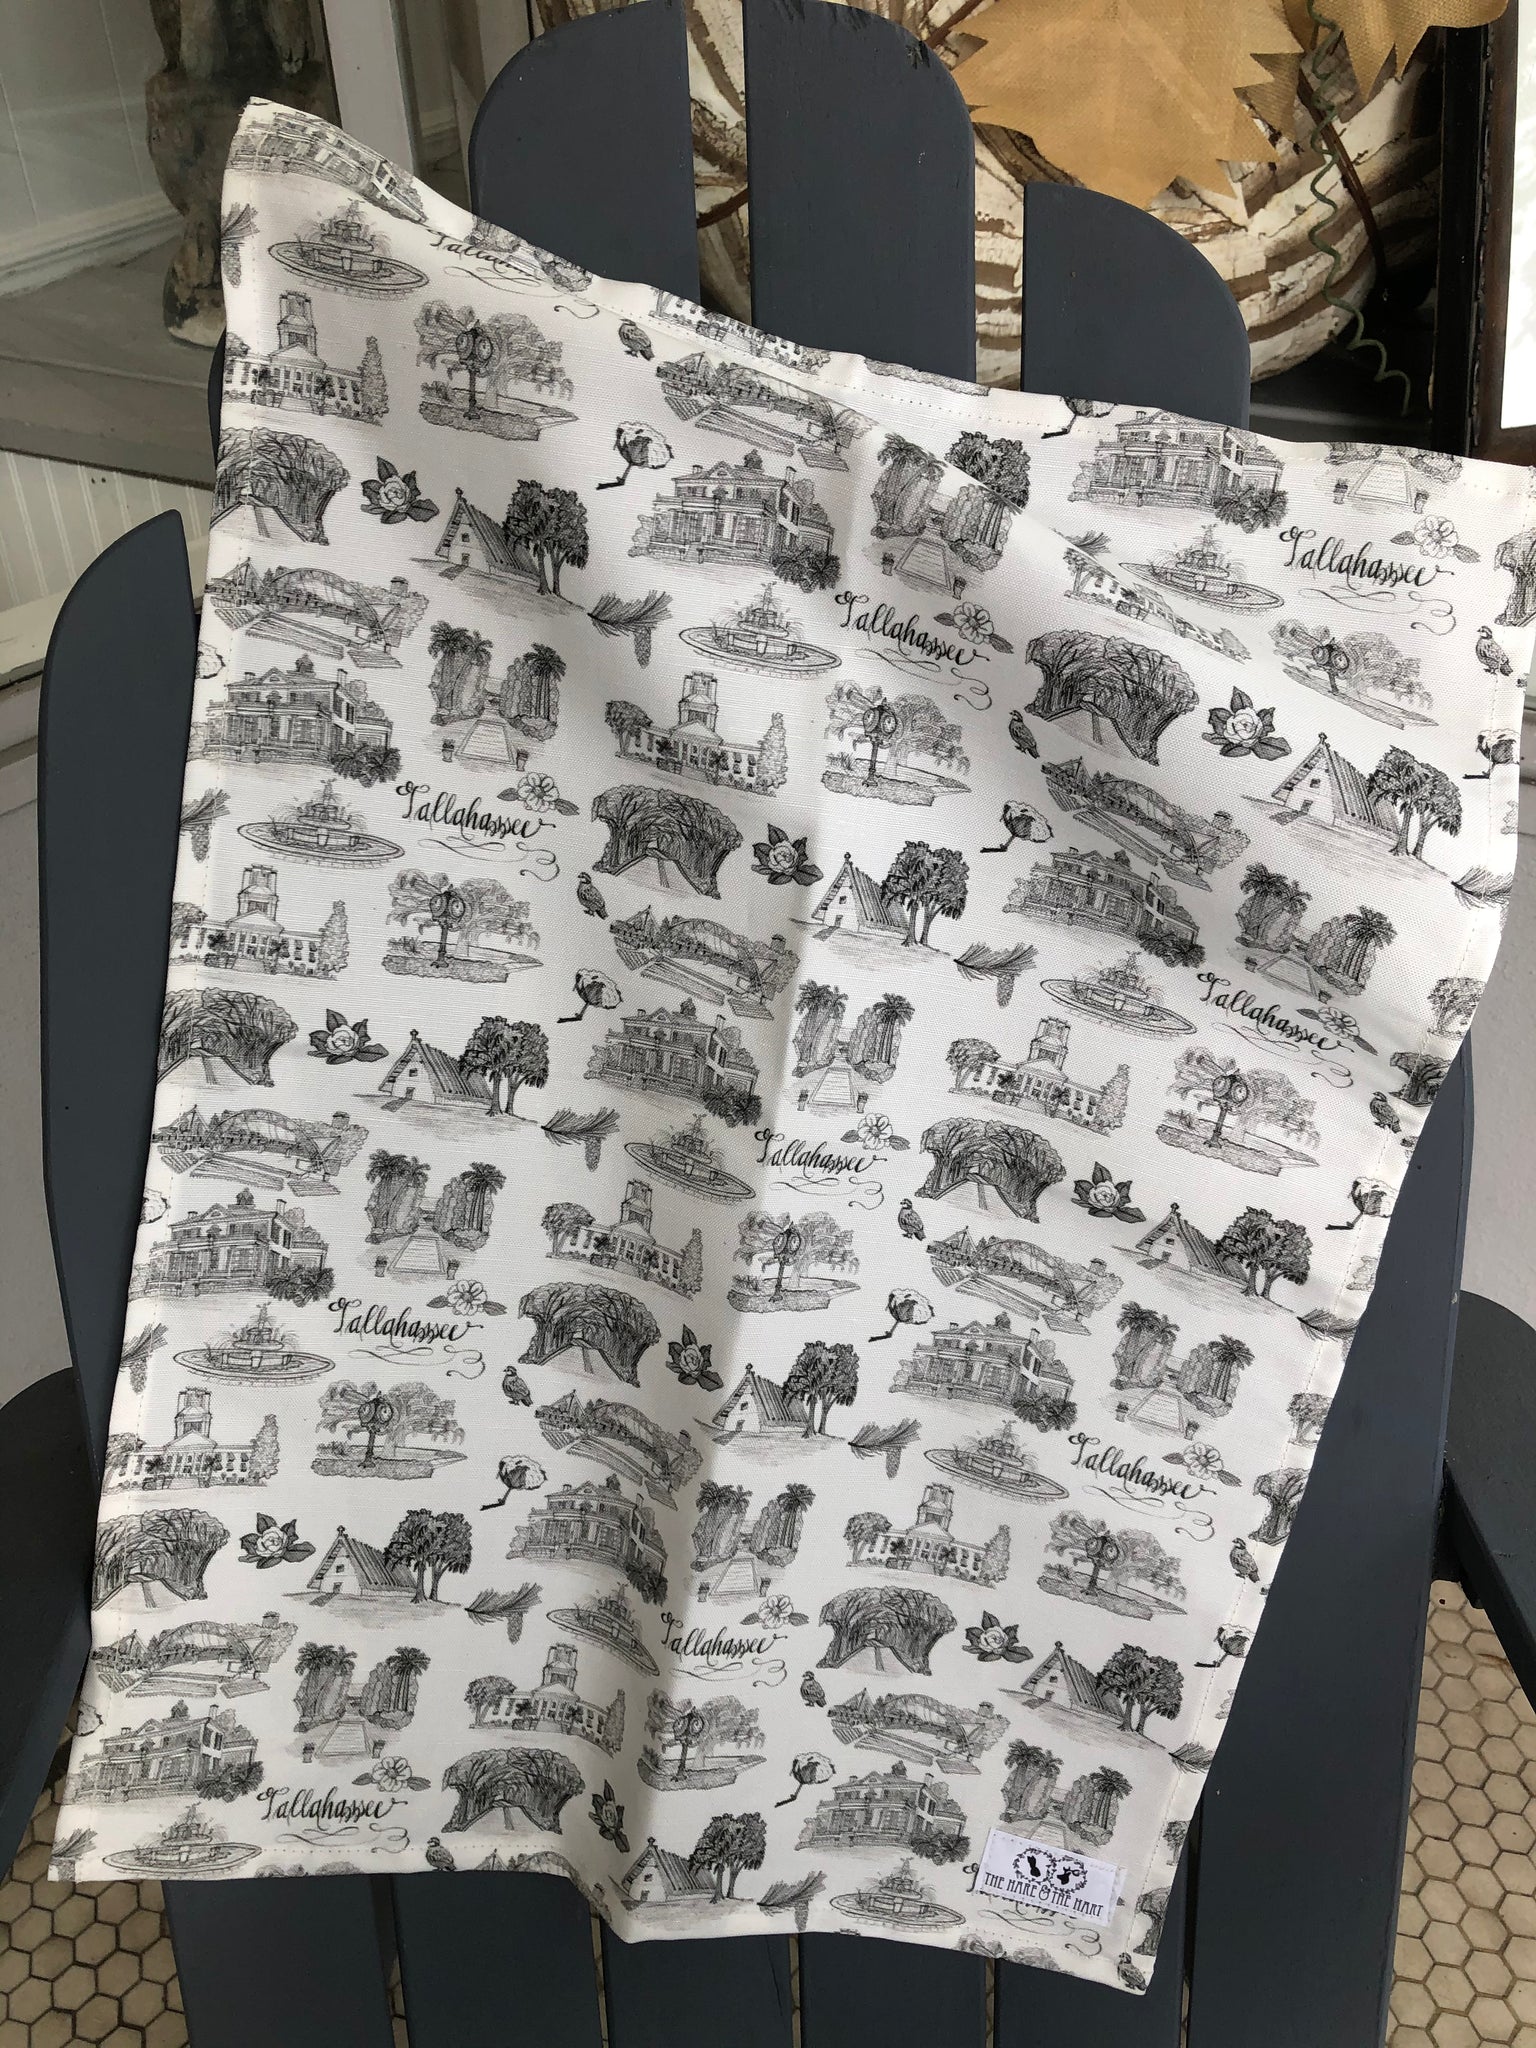 There is a tea towel made of black and white Toile of Tallahassee fabric.